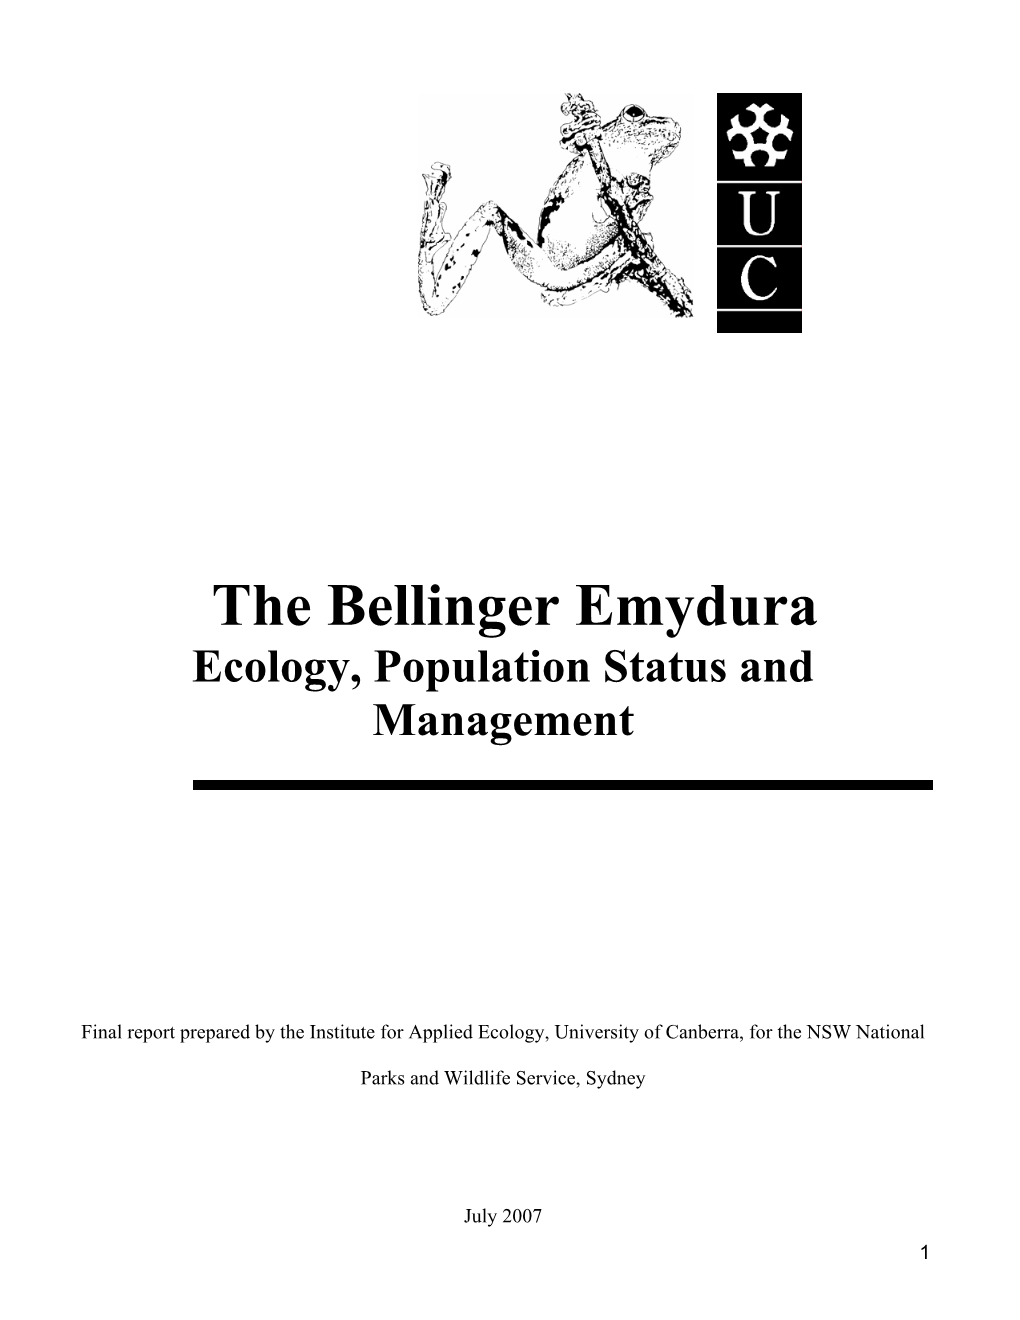 The Bellinger Emydura Ecology, Population Status and Management